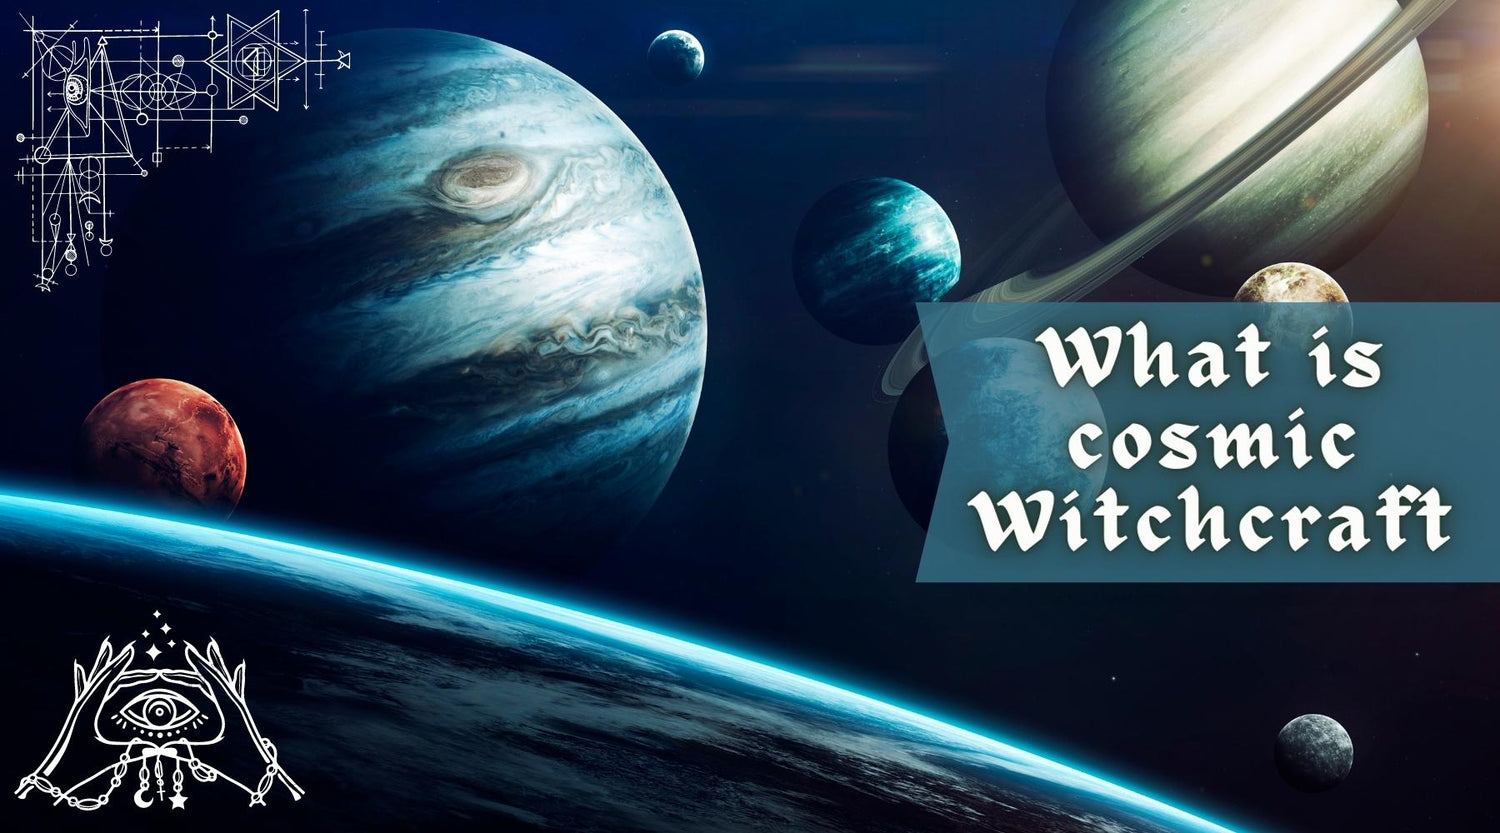 What is Cosmic Witchcraft?